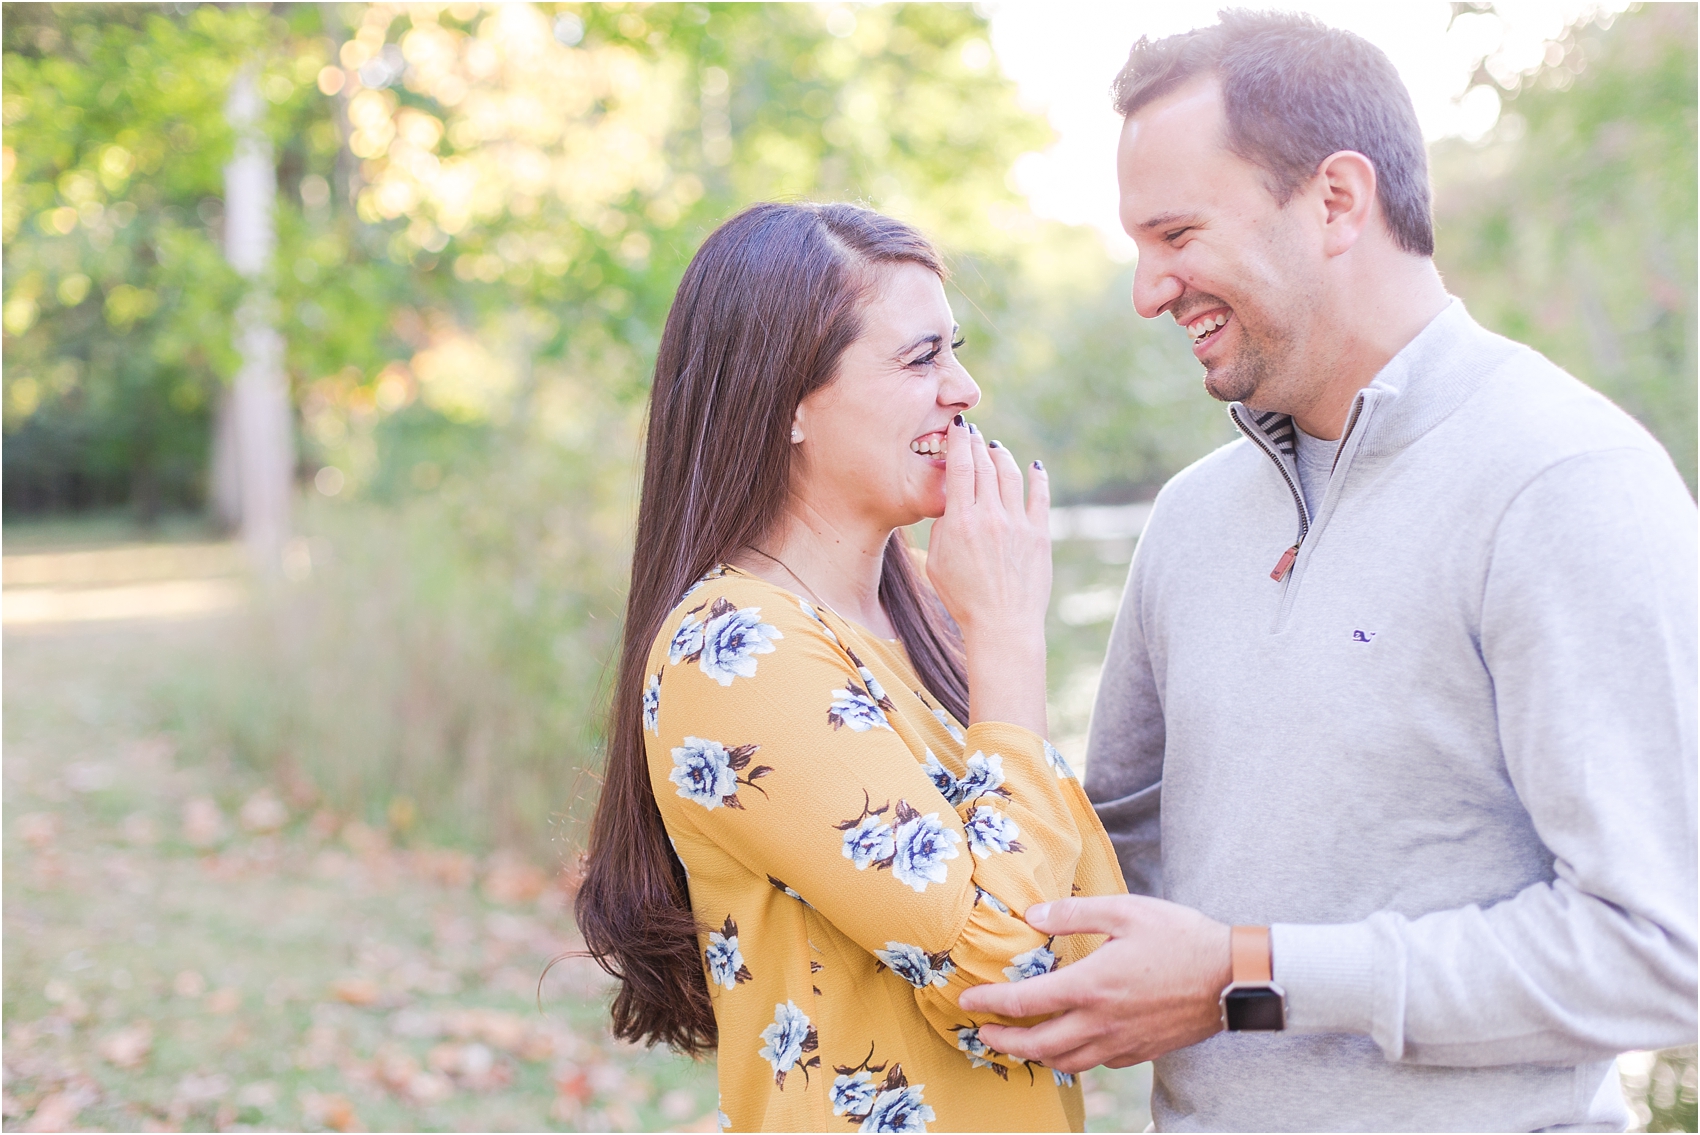 relaxed-autumn-engagement-photos-at-hudson-mills-metropark-in-dexter-mi-by-courtney-carolyn-photography_0035.jpg